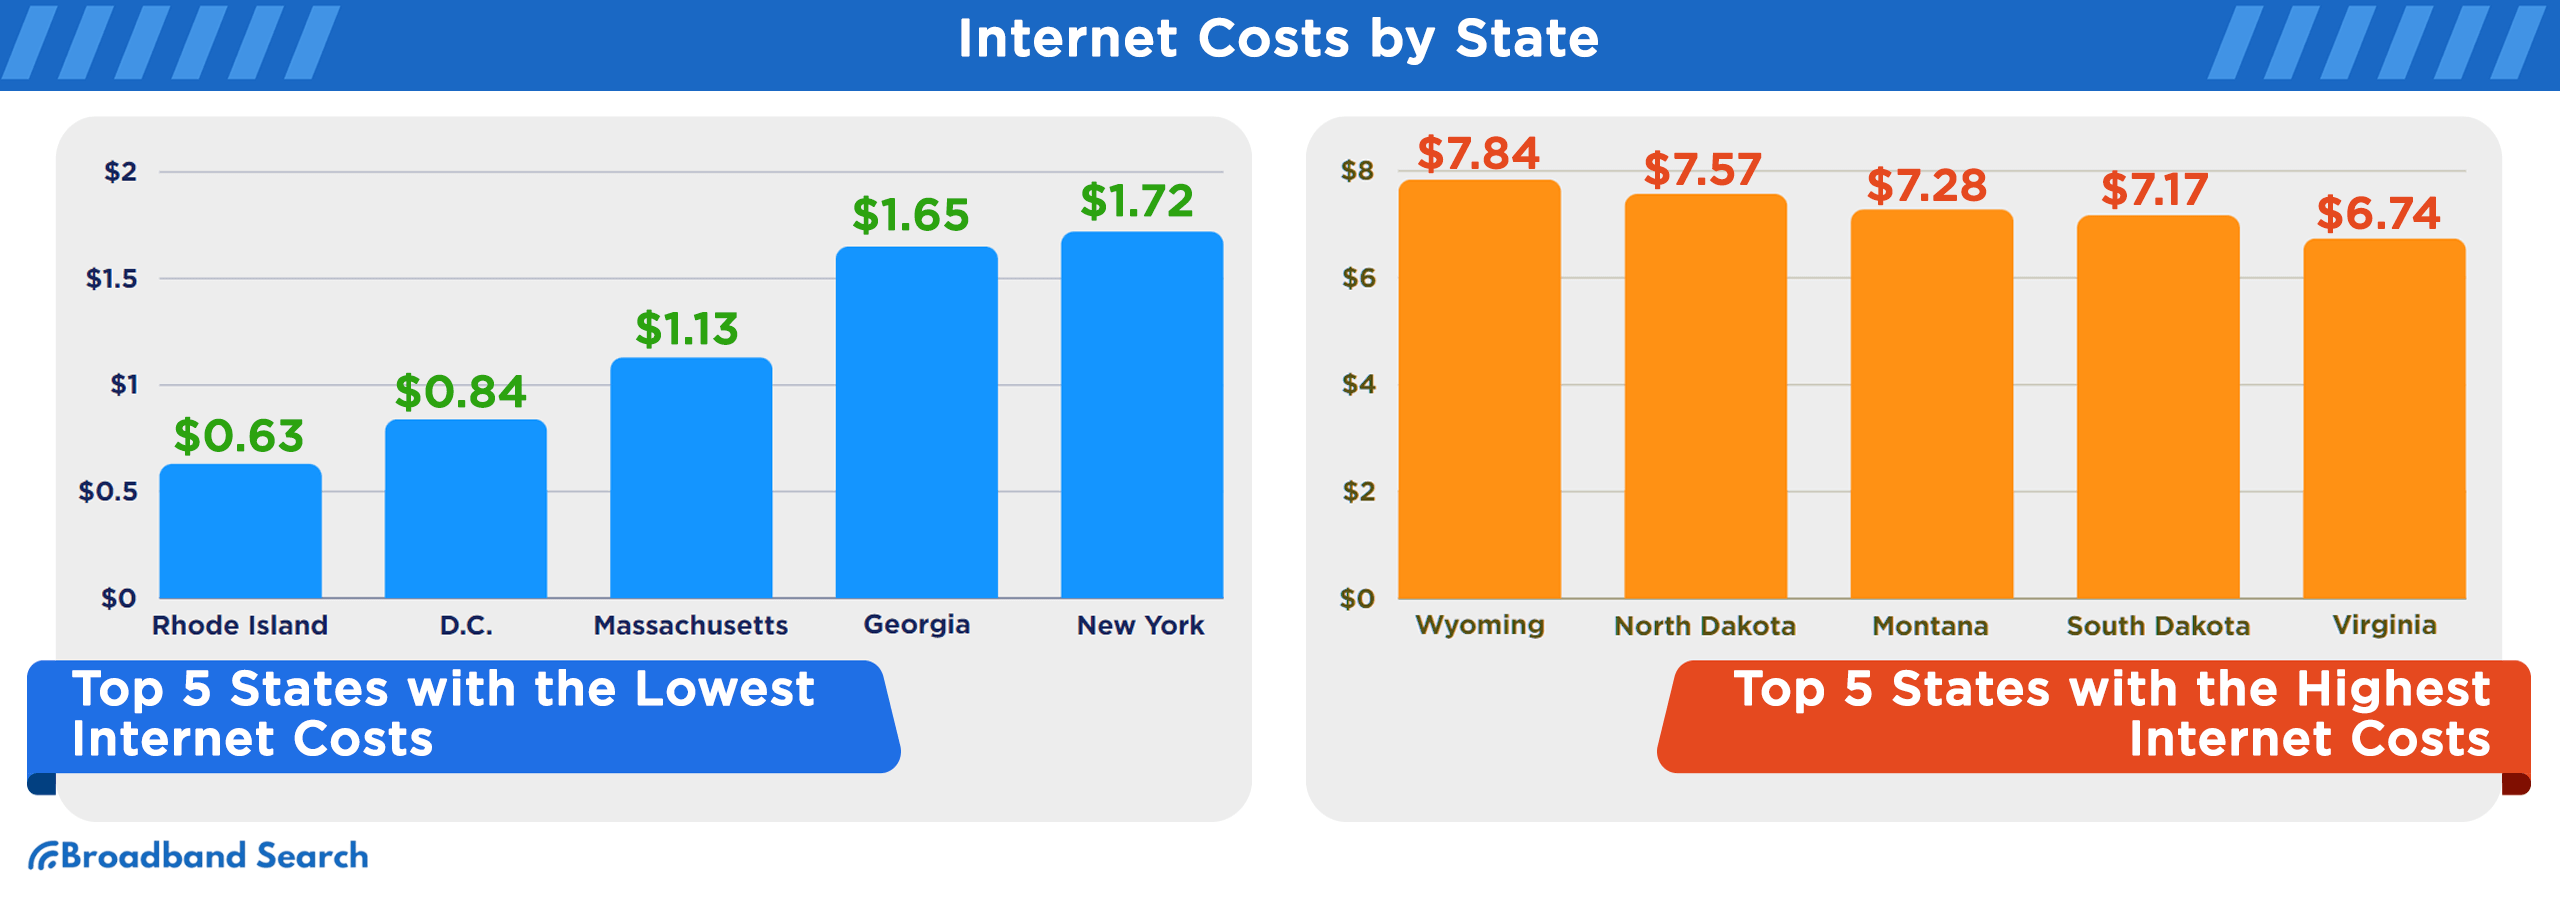 Comparison of internet costs by state in the U.S.